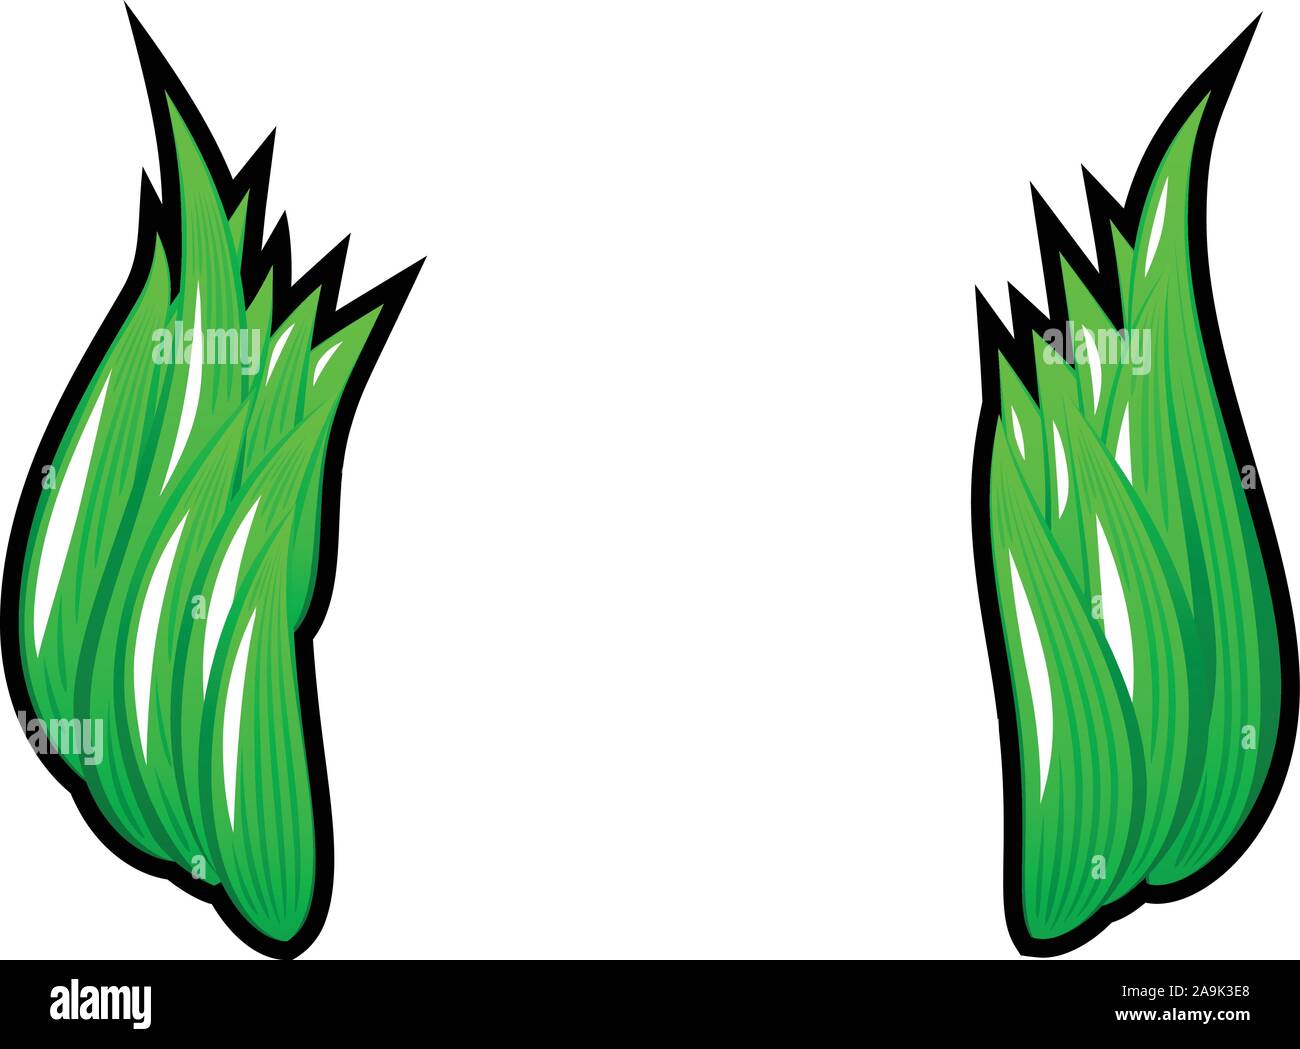 Double mohawk haircut with rave or punk styled green hair Stock Vector